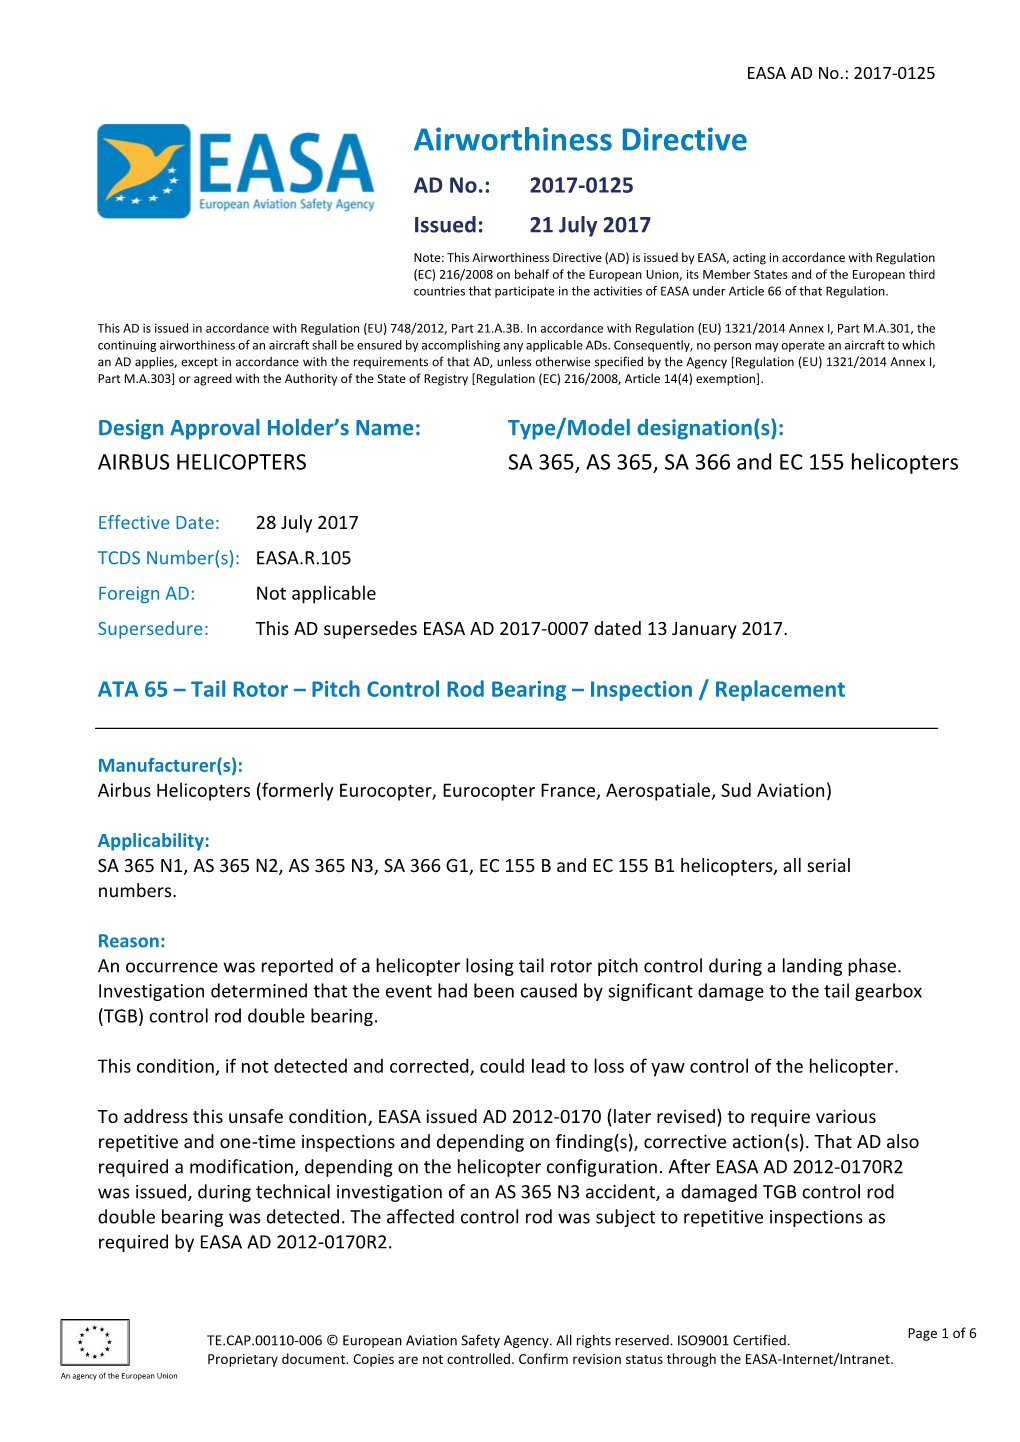 EASA Recommended Master Template